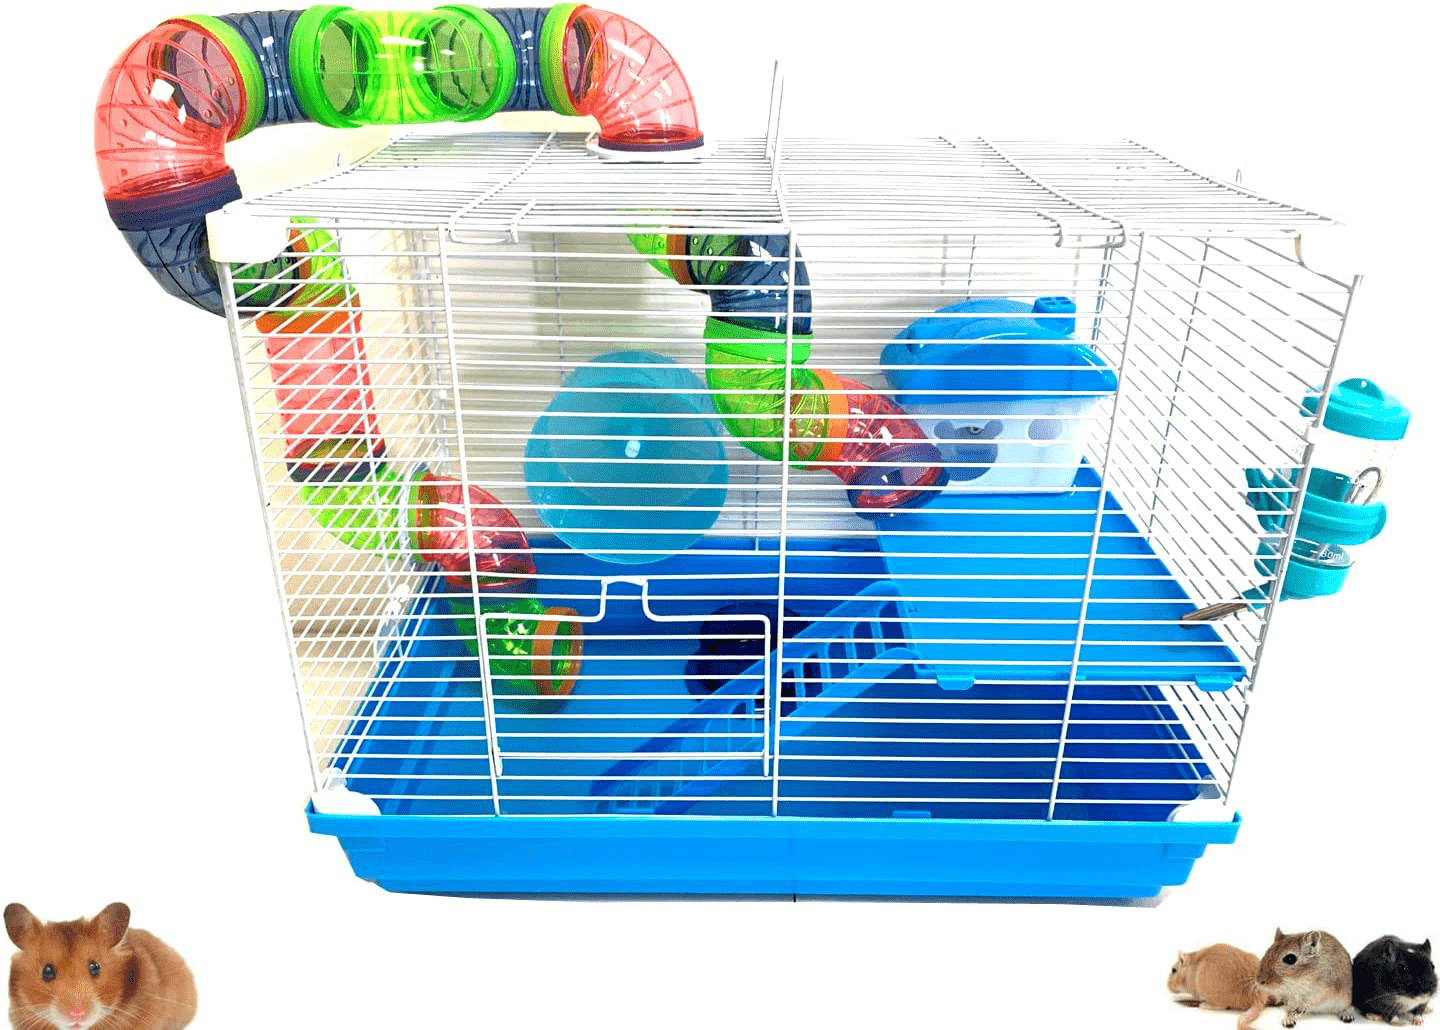 2 Floor Syrian Hamster Habitat Rodent Gerbil Mouse Mice Rats Animal Cage Animals & Pet Supplies > Pet Supplies > Small Animal Supplies > Small Animal Habitats & Cages Mcage Blue 19 x 12 x 15"H 